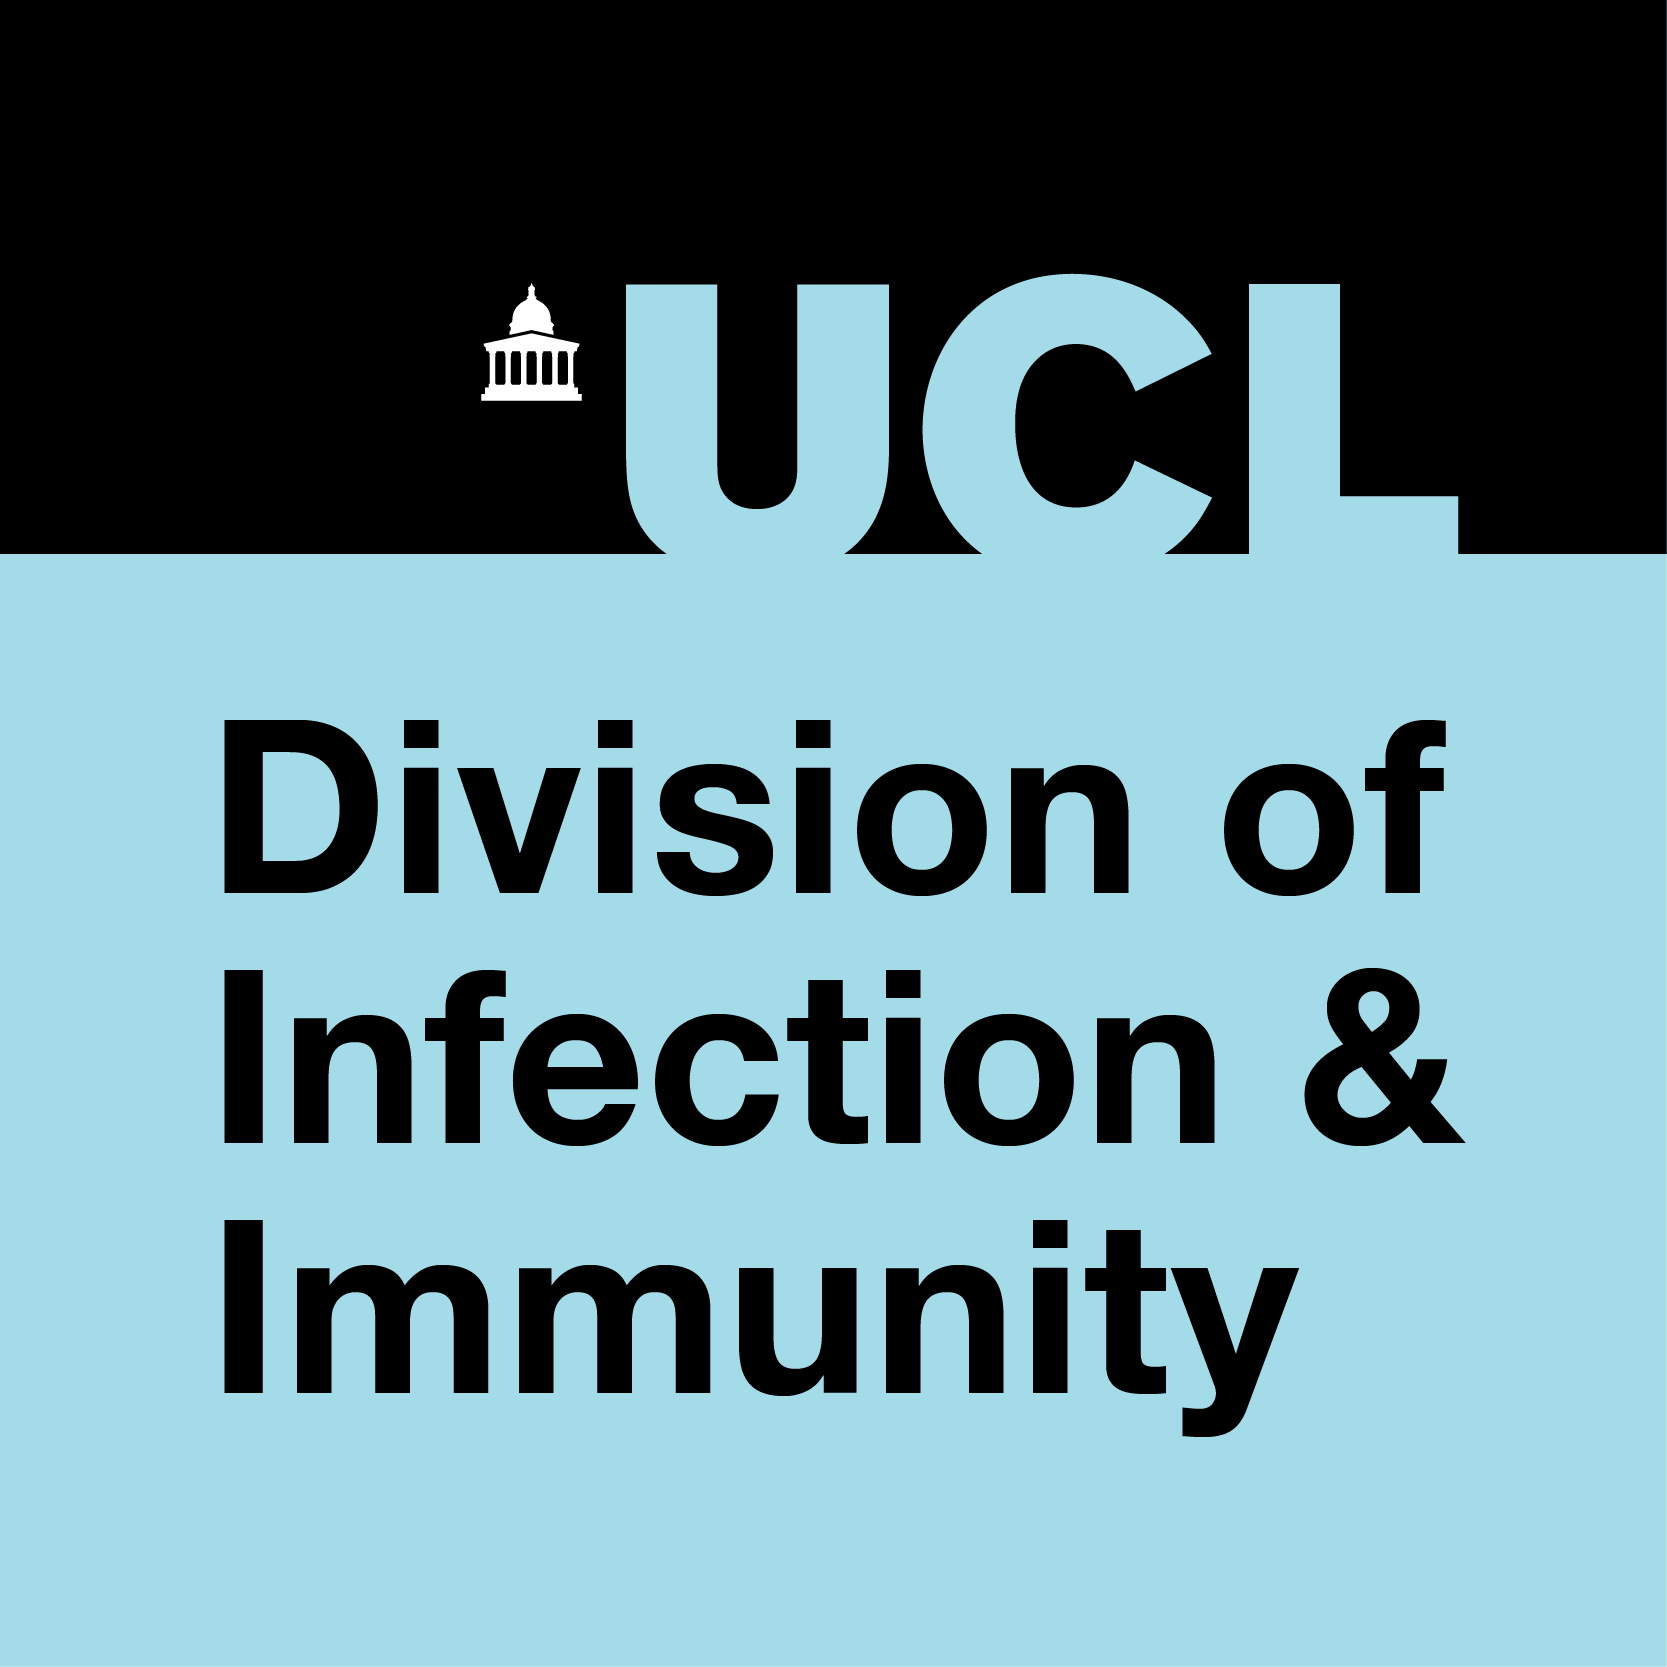 Tweets from the @UCL Division of Infection and Immunity.